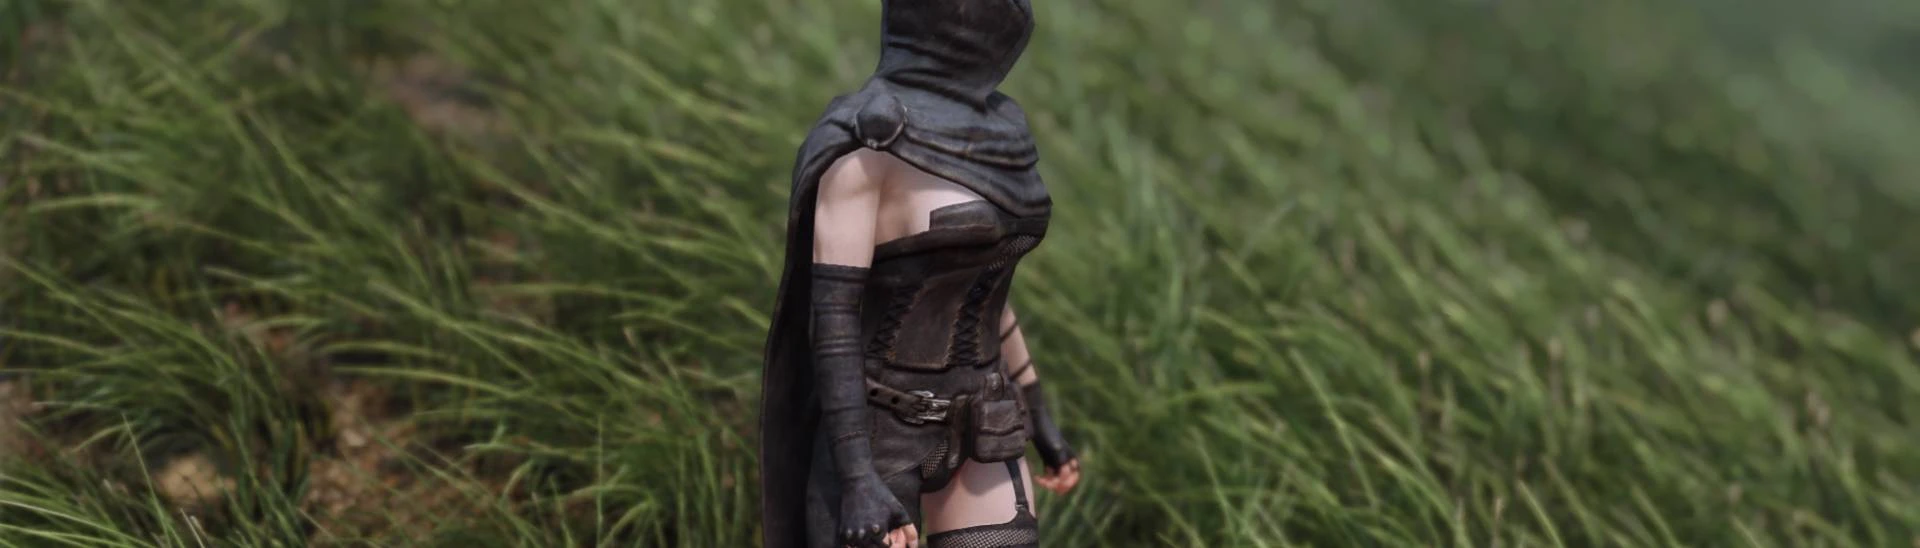 DX Tembtra Thief Outfit Spid At Skyrim Special Edition Nexus Mods And